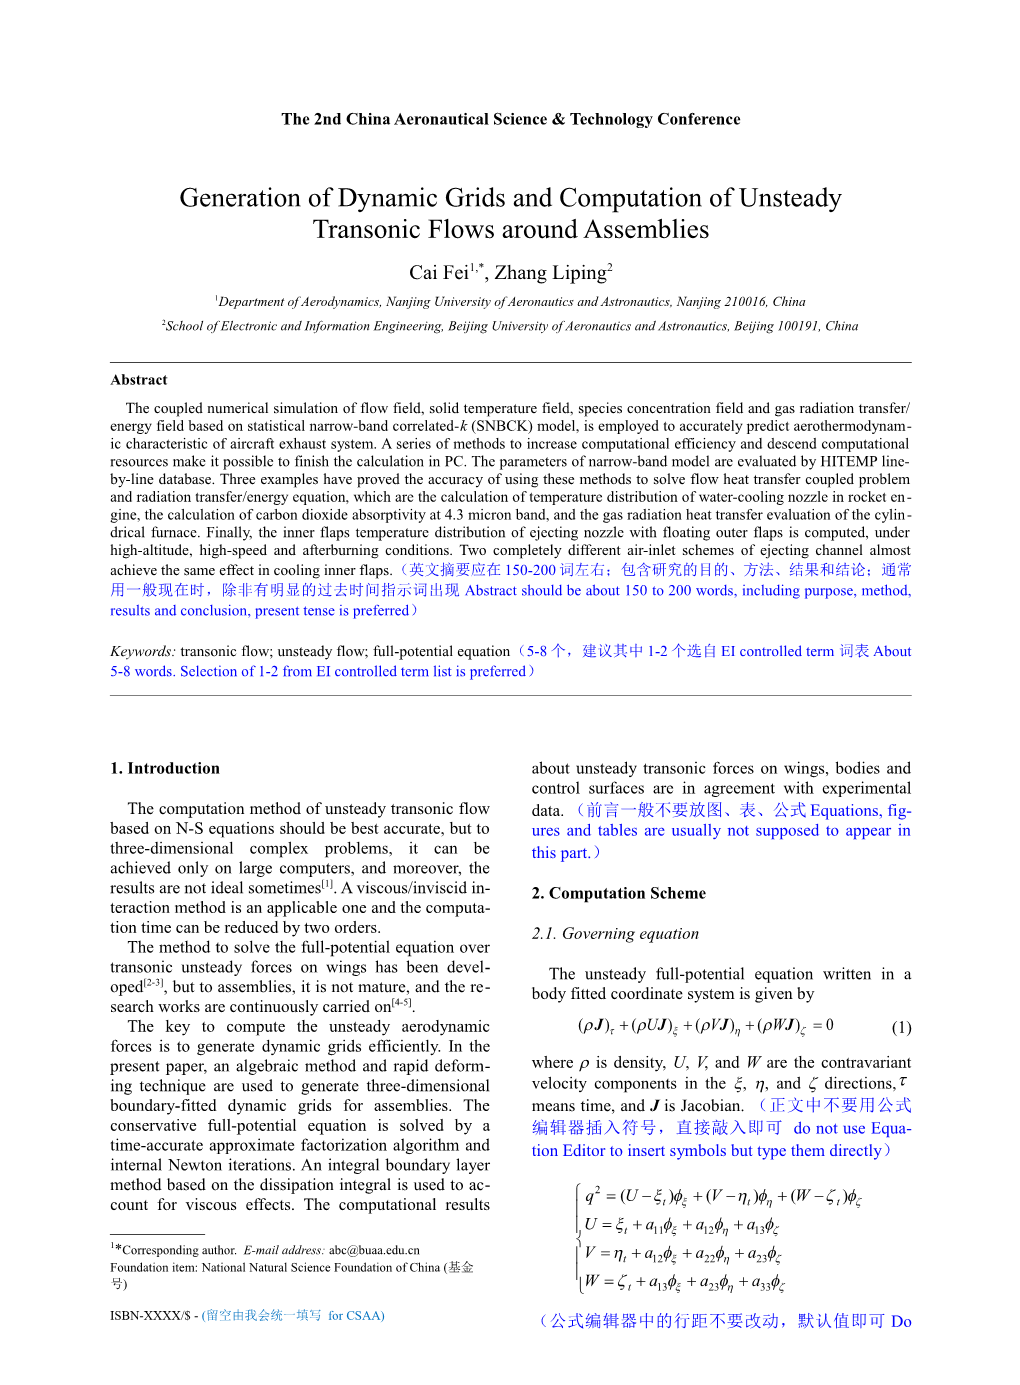 Generation of Dynamic Grids and Computation of Unsteady Transonic Flows Around Assemblies